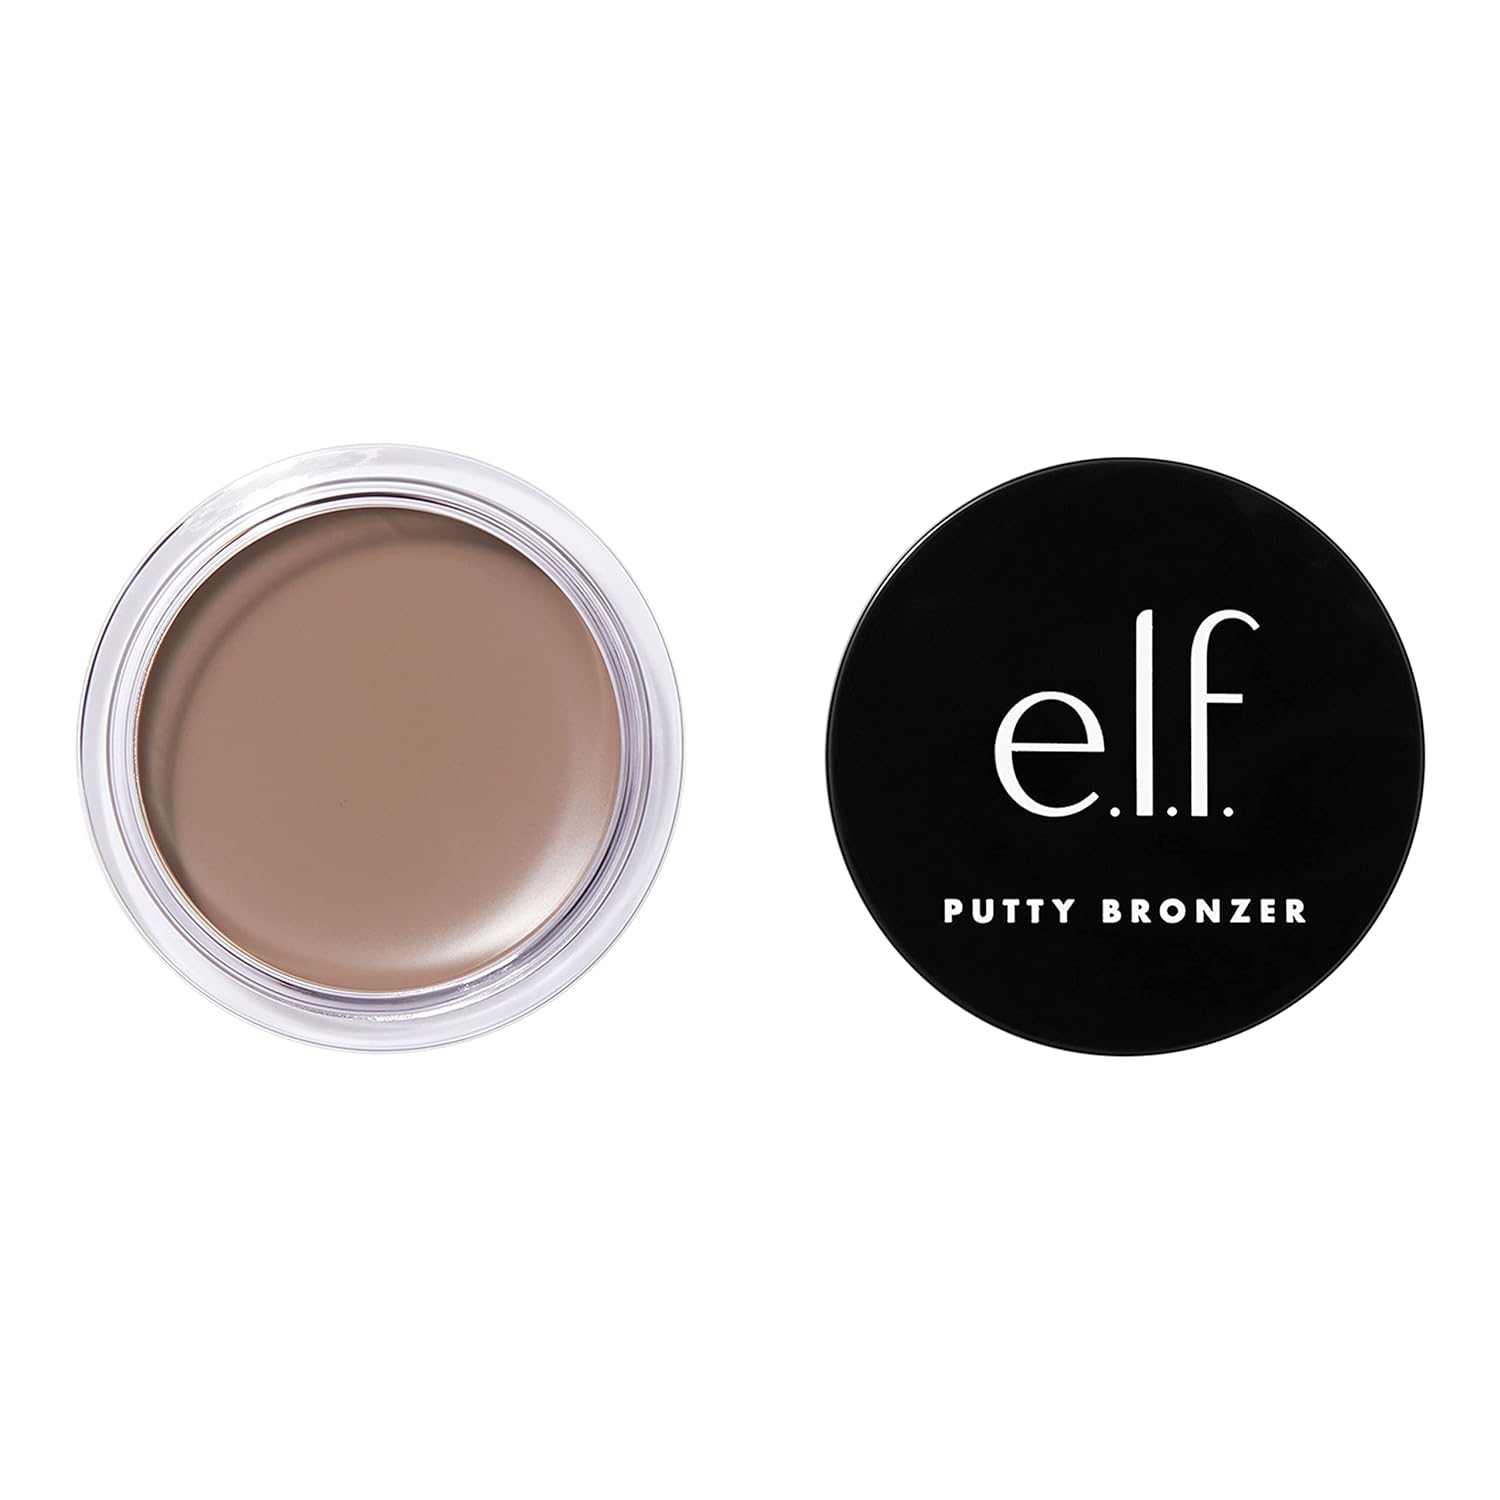 eleven. Putty Bronzer, Creamy & Highly Pigmented Formula, Provides A Long-Lasting Tanned Shimmer, with Argan Oil & Vitamin E, Feelin \ 'Shady, 0.35 OZ (10 g)